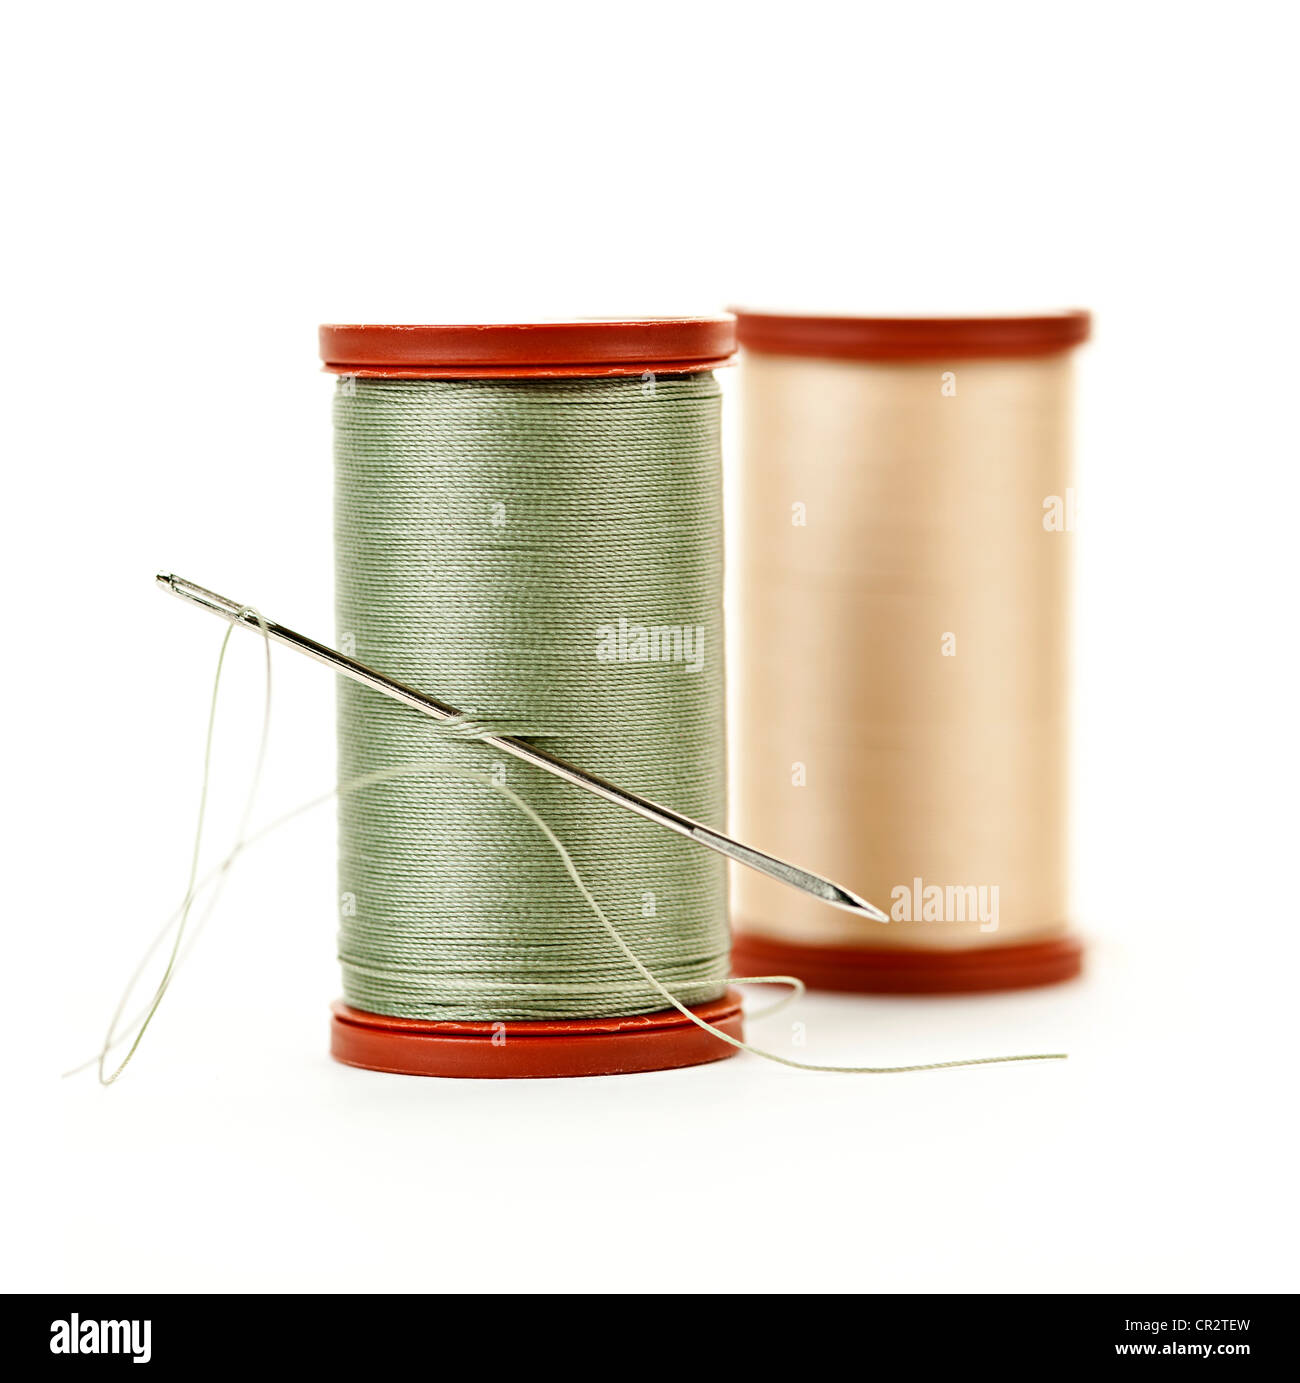 Spool of thread with needle isolated on white background. Sewing